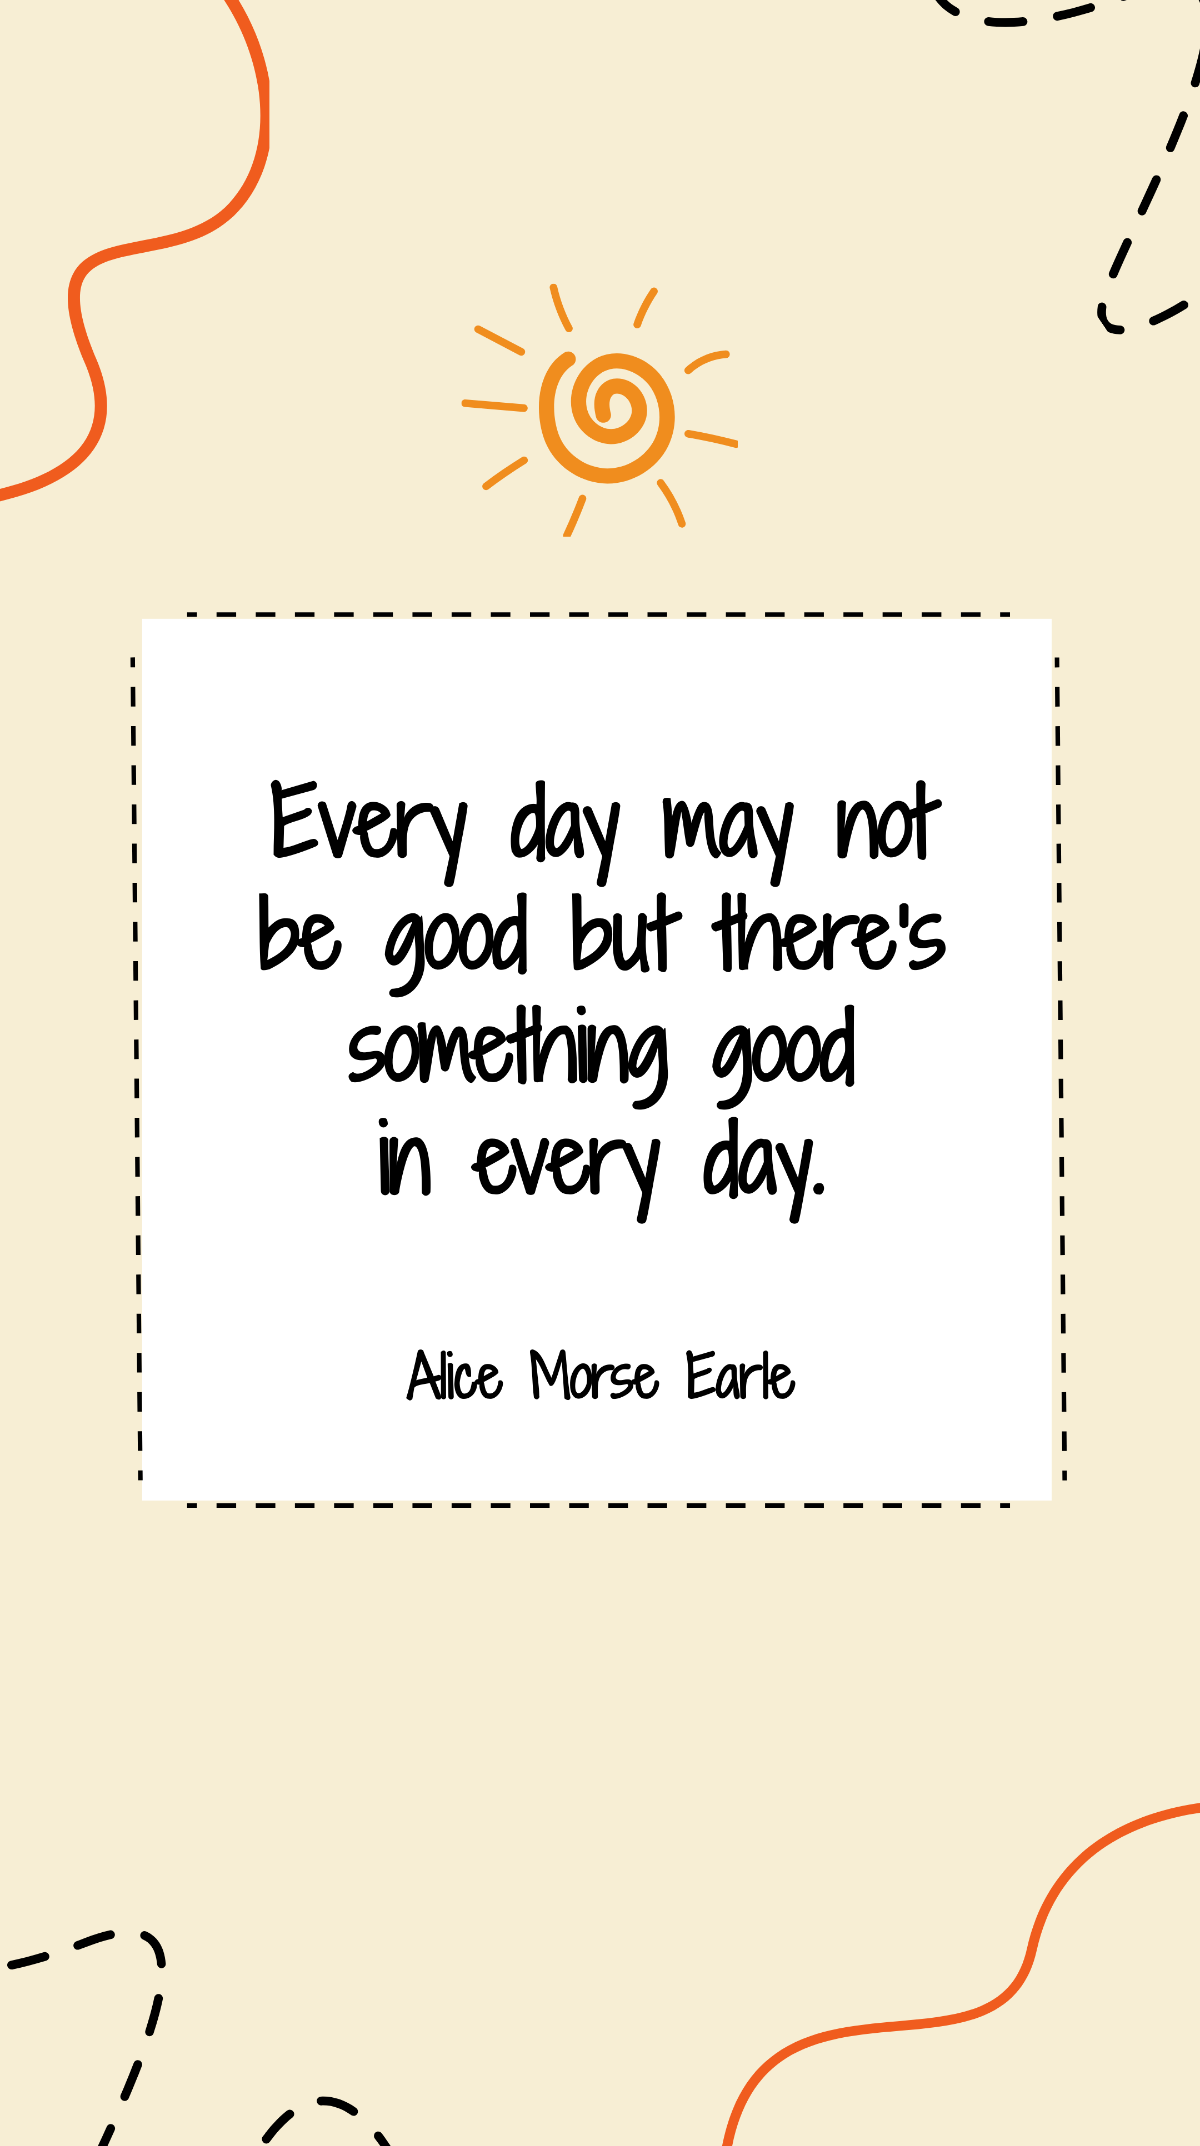 Alice Morse Earle - Every day may not be good but there's something good in every day. Template